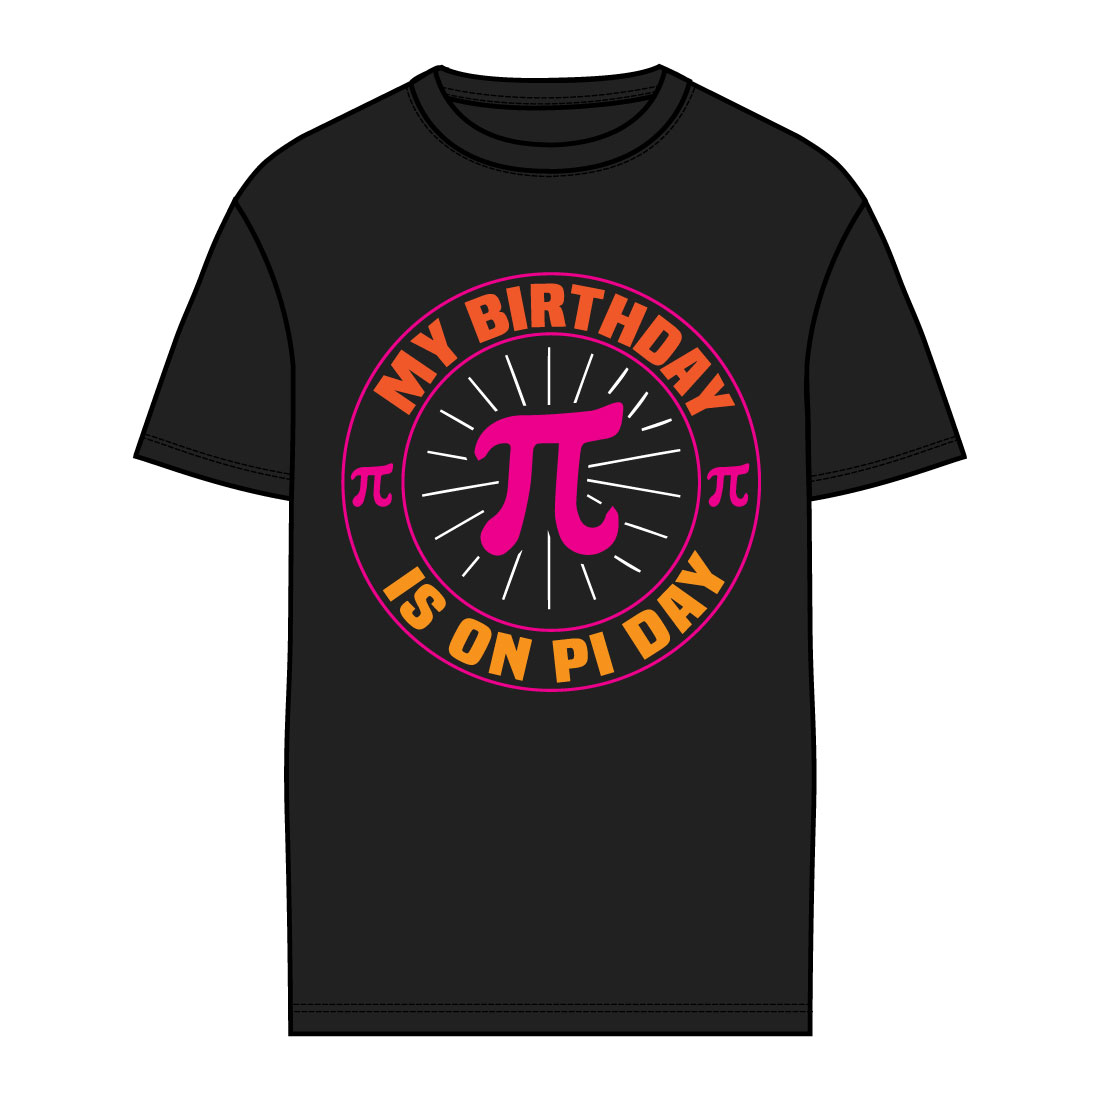 4 happy pi day t-shirt design cover image.